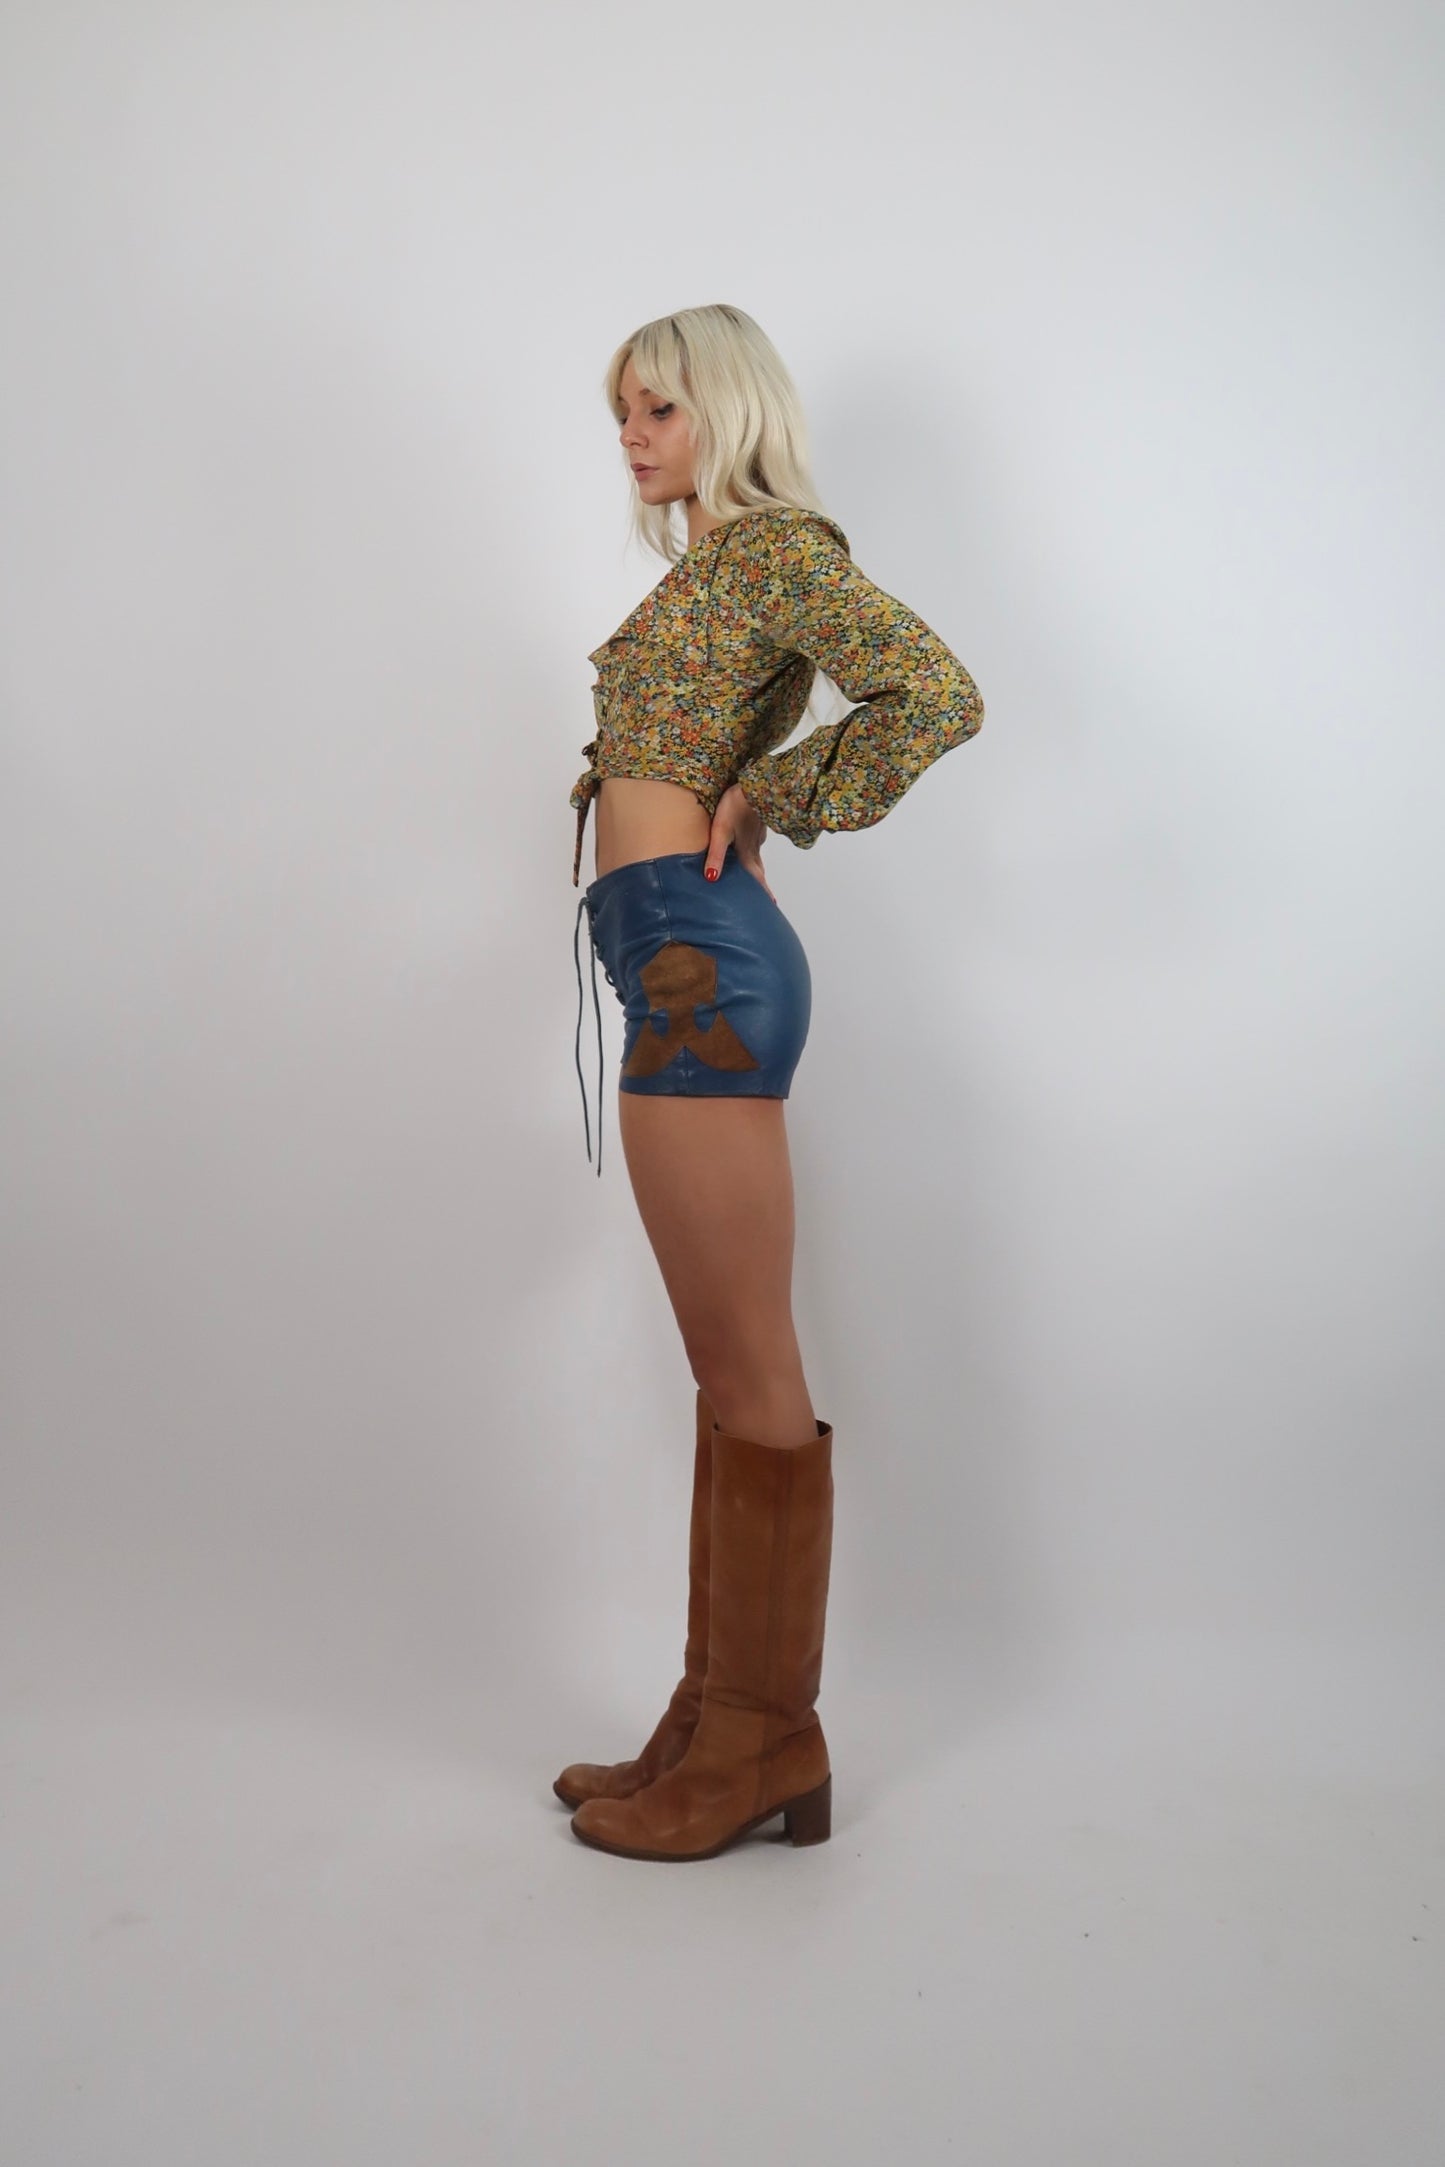 1970s blue leather hot pant shorts